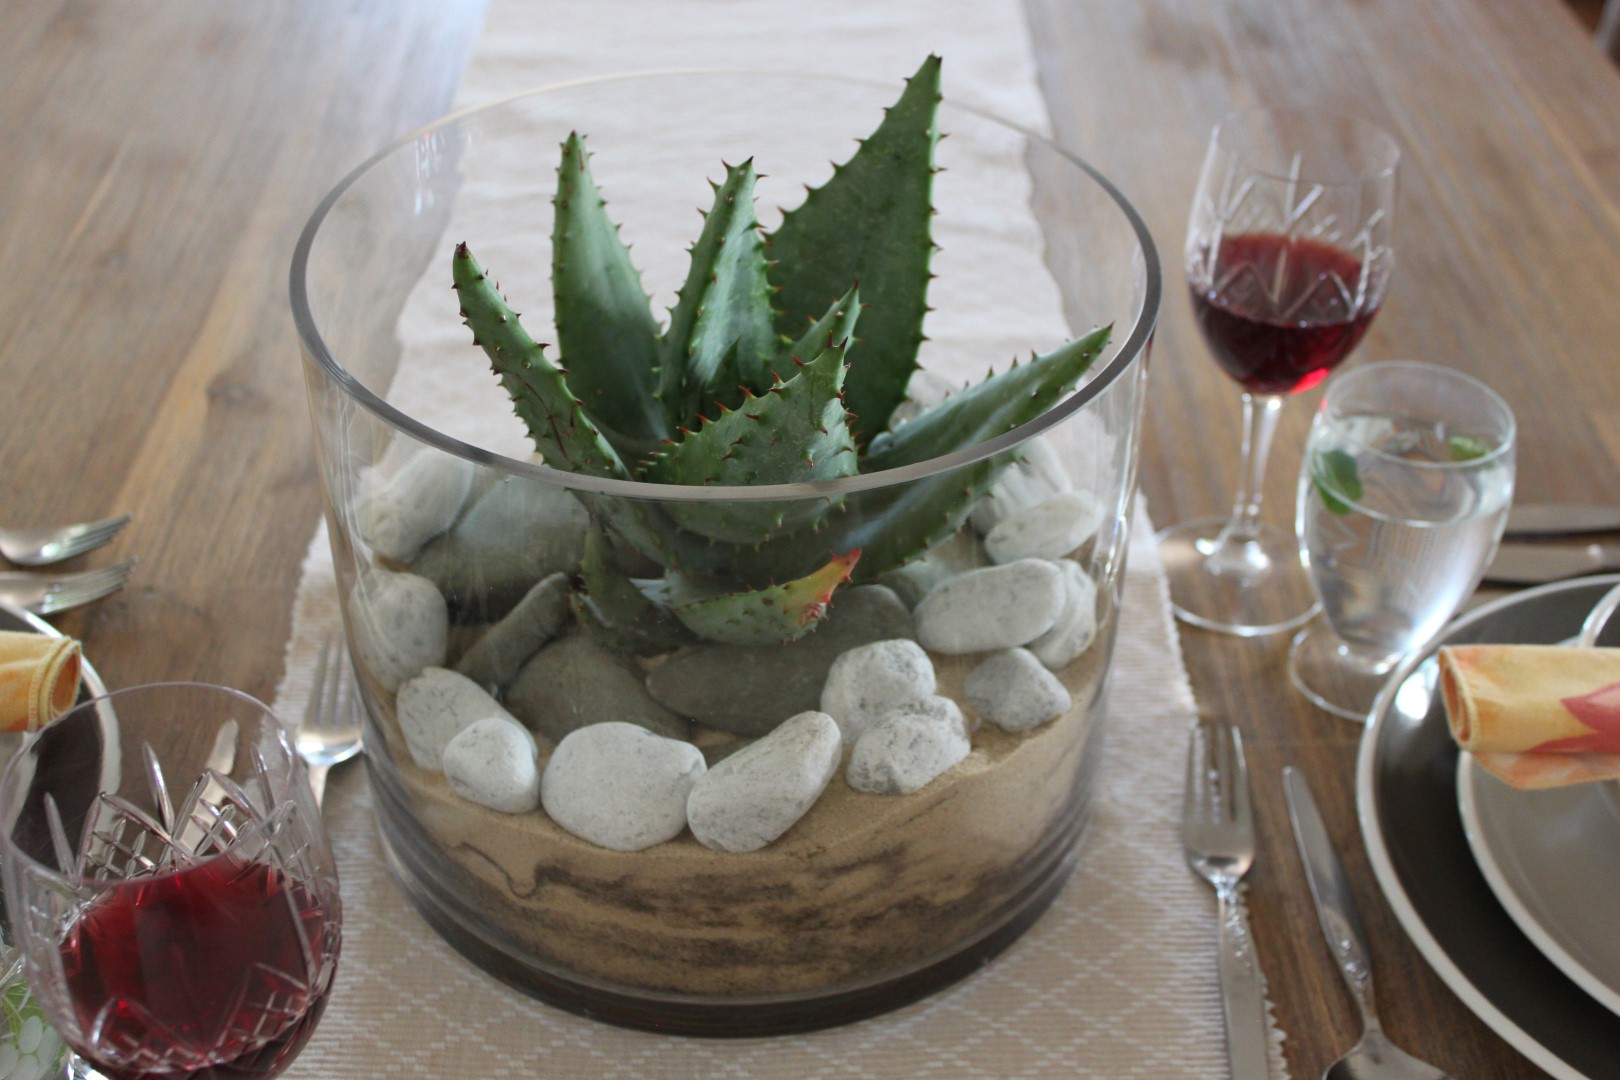 How To Make A Decorative Aloe In A Vase Table Centre Piece Get